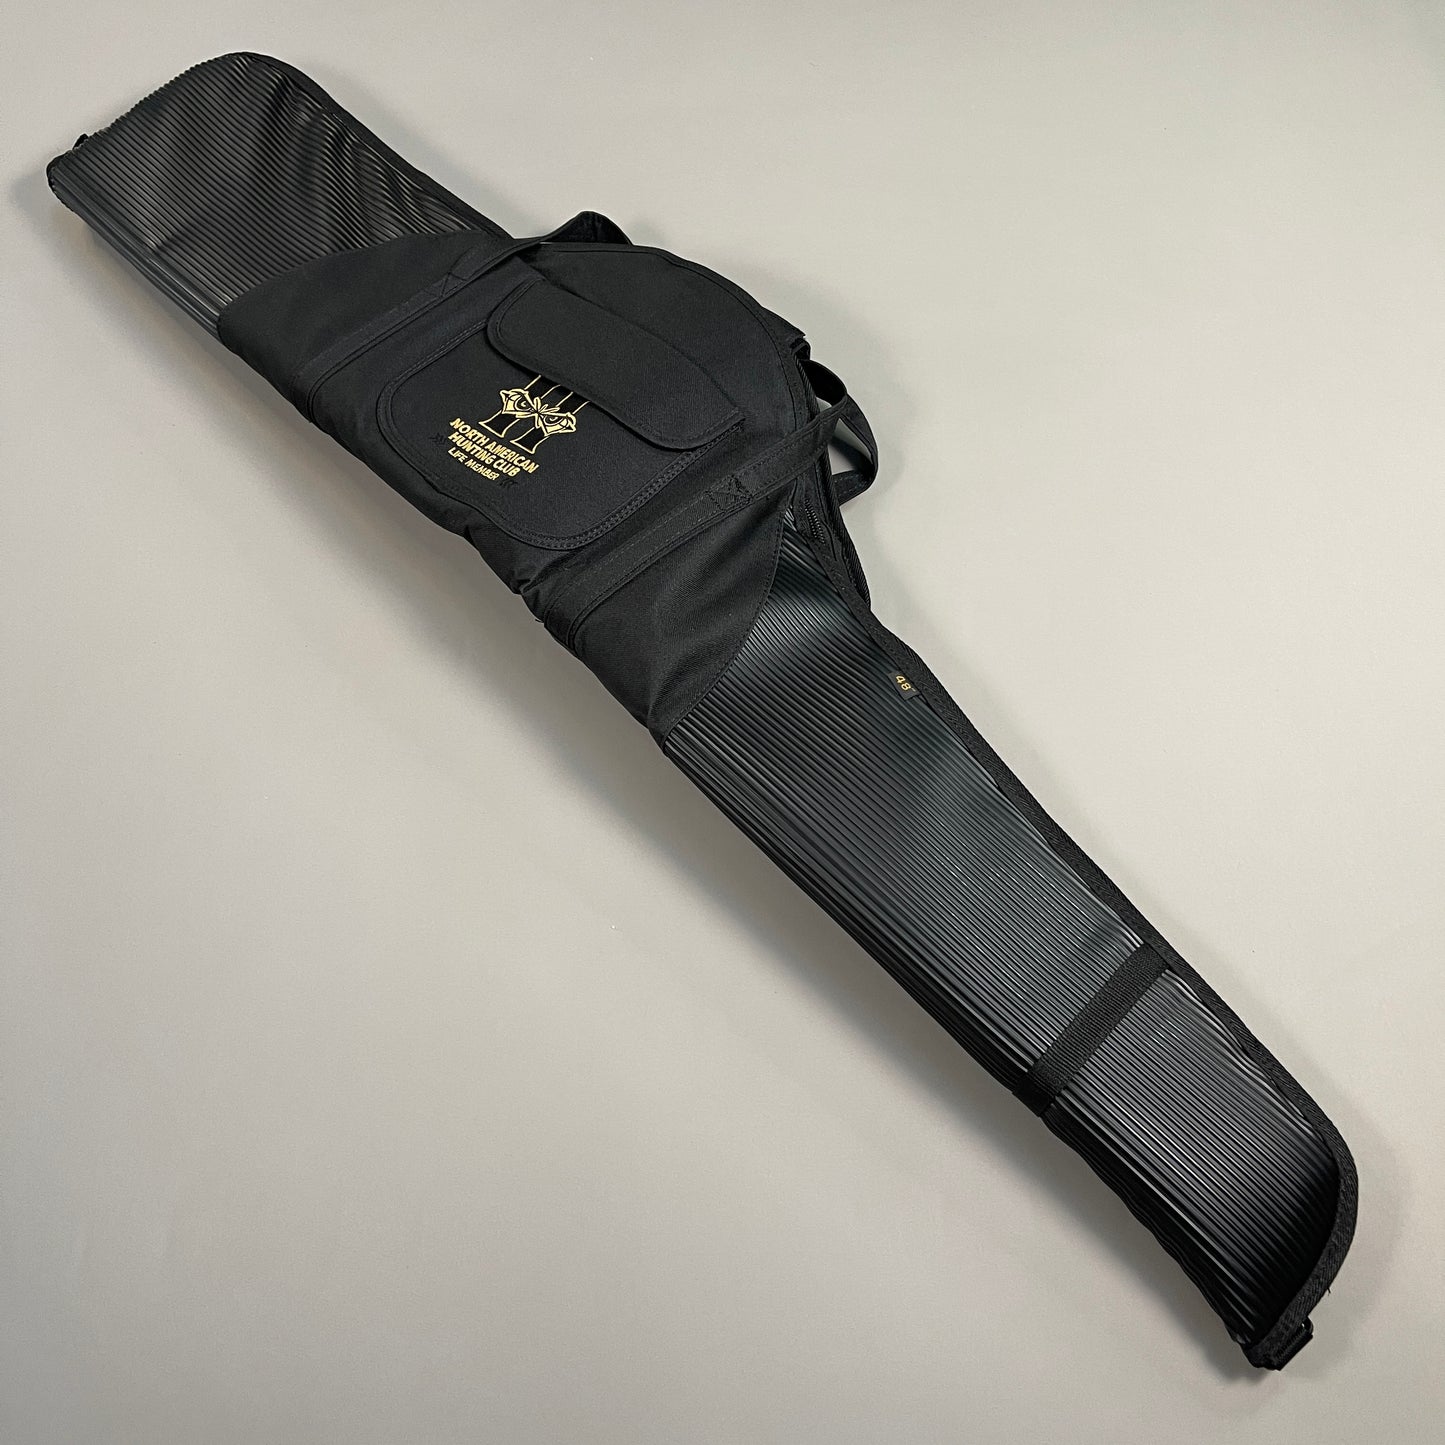 ZA@ NORTH AMERICAN HUNTING CLUB Padded Rifle Bag 48" Protected By Intercept Tech (New)